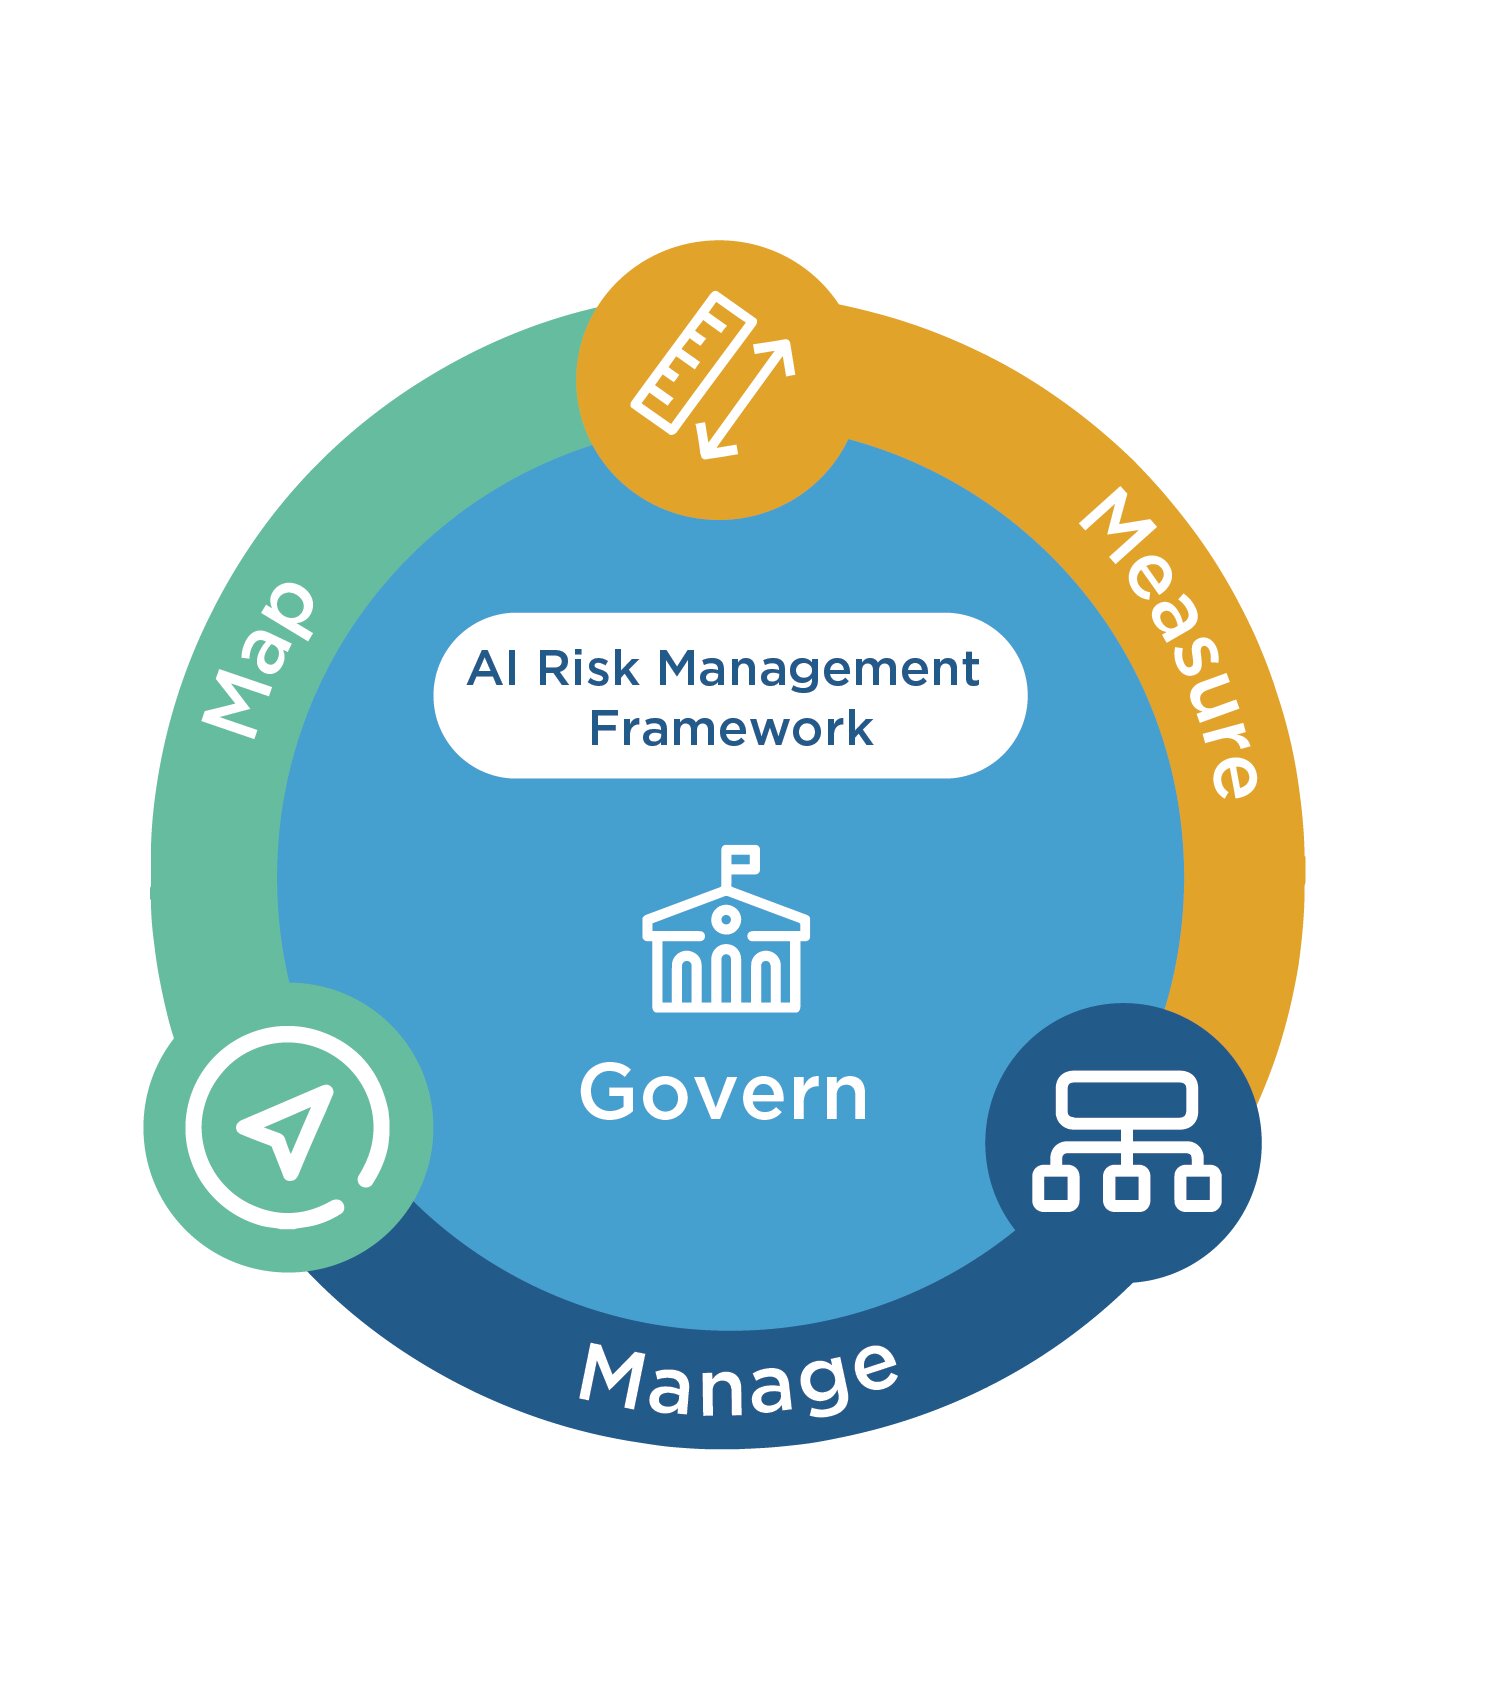 risk-management-framework-aims-to-improve-trustworthiness-of-artificial